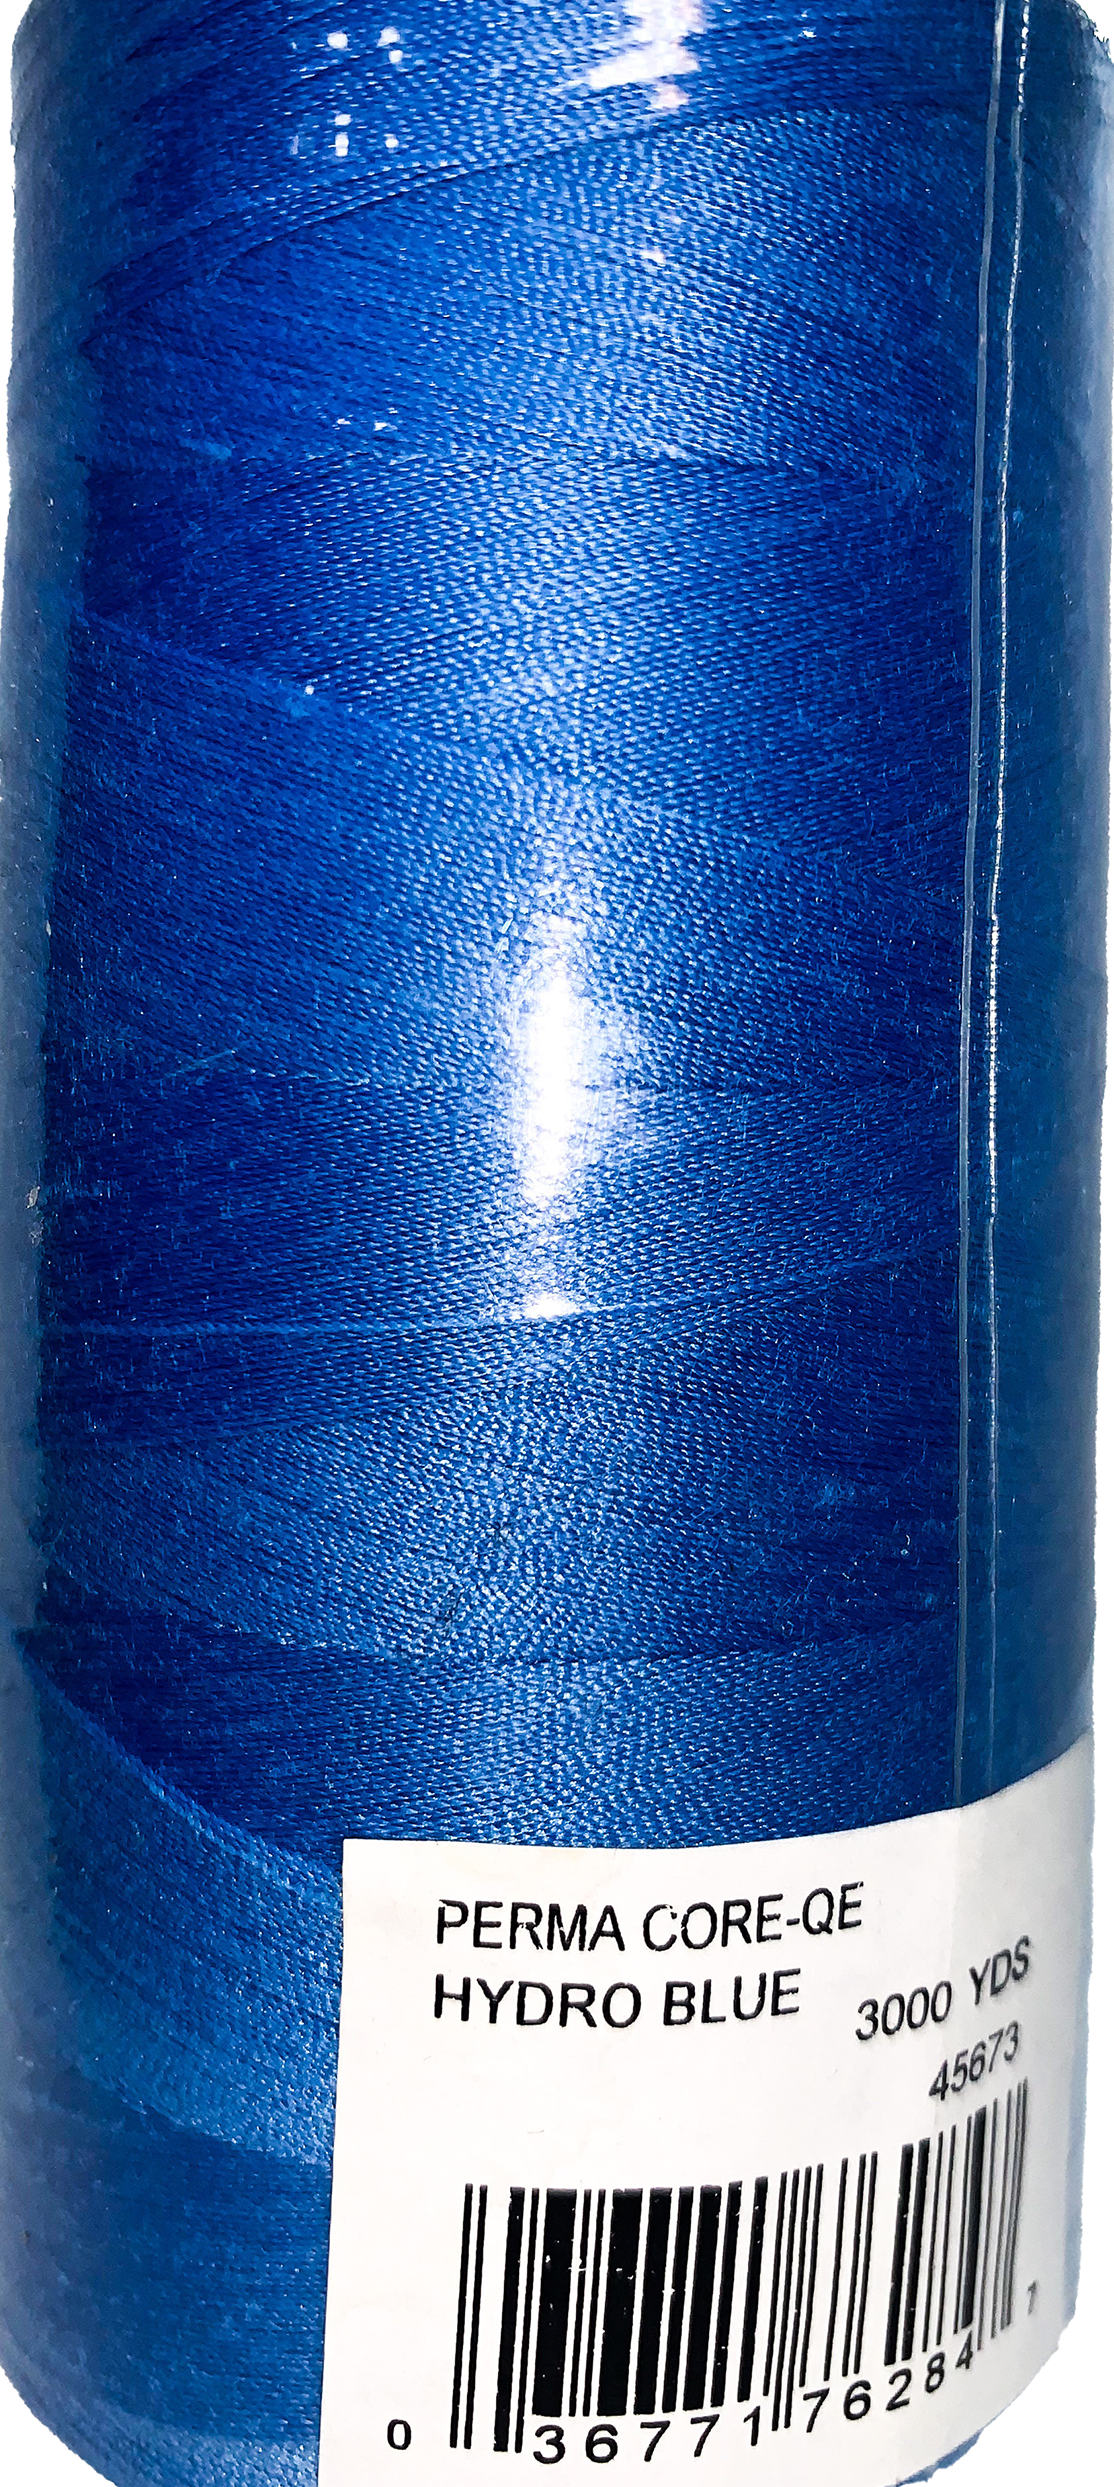 Perma Core Quilter's Edition Thread 3000 yard spools